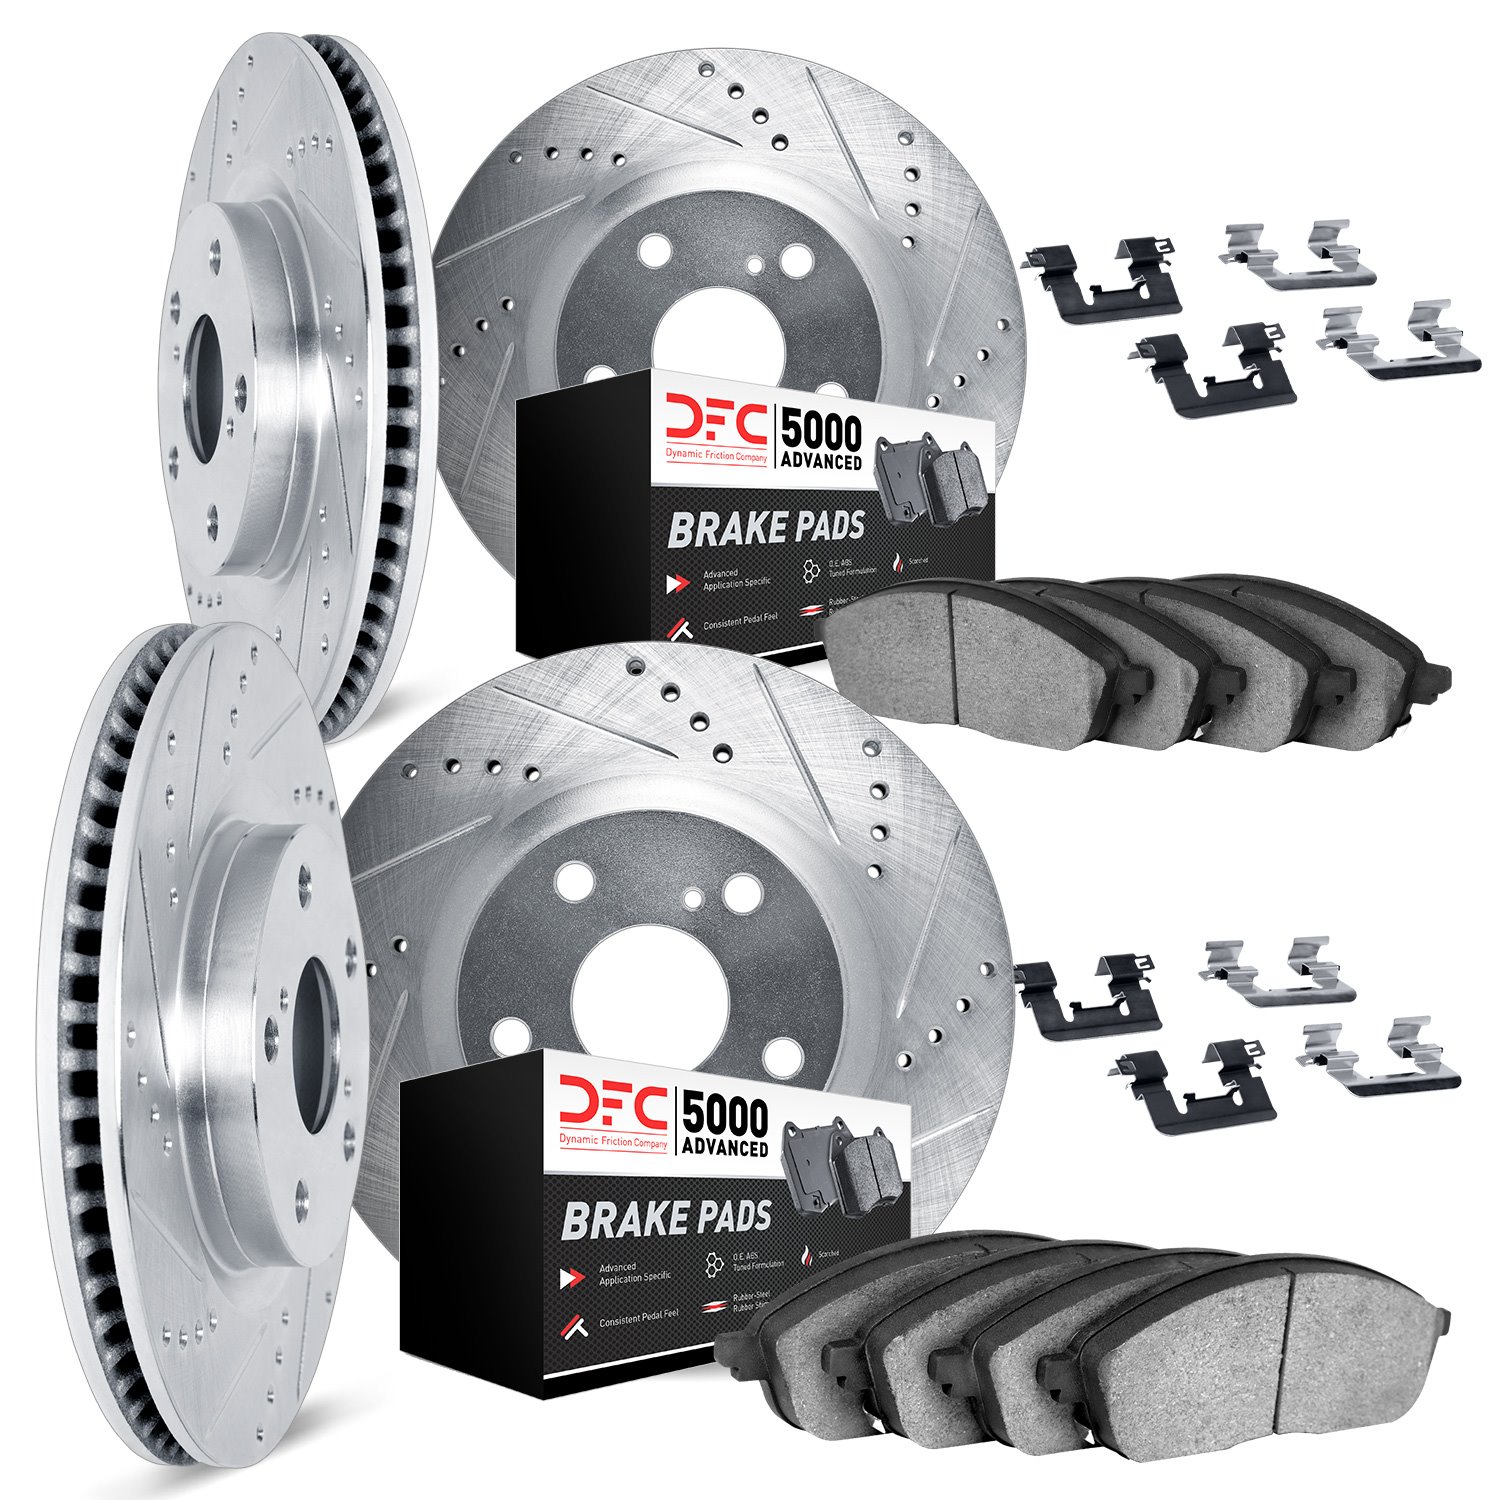 7514-63130 Drilled/Slotted Brake Rotors w/5000 Advanced Brake Pads Kit & Hardware [Silver], 2016-2018 Mercedes-Benz, Position: F